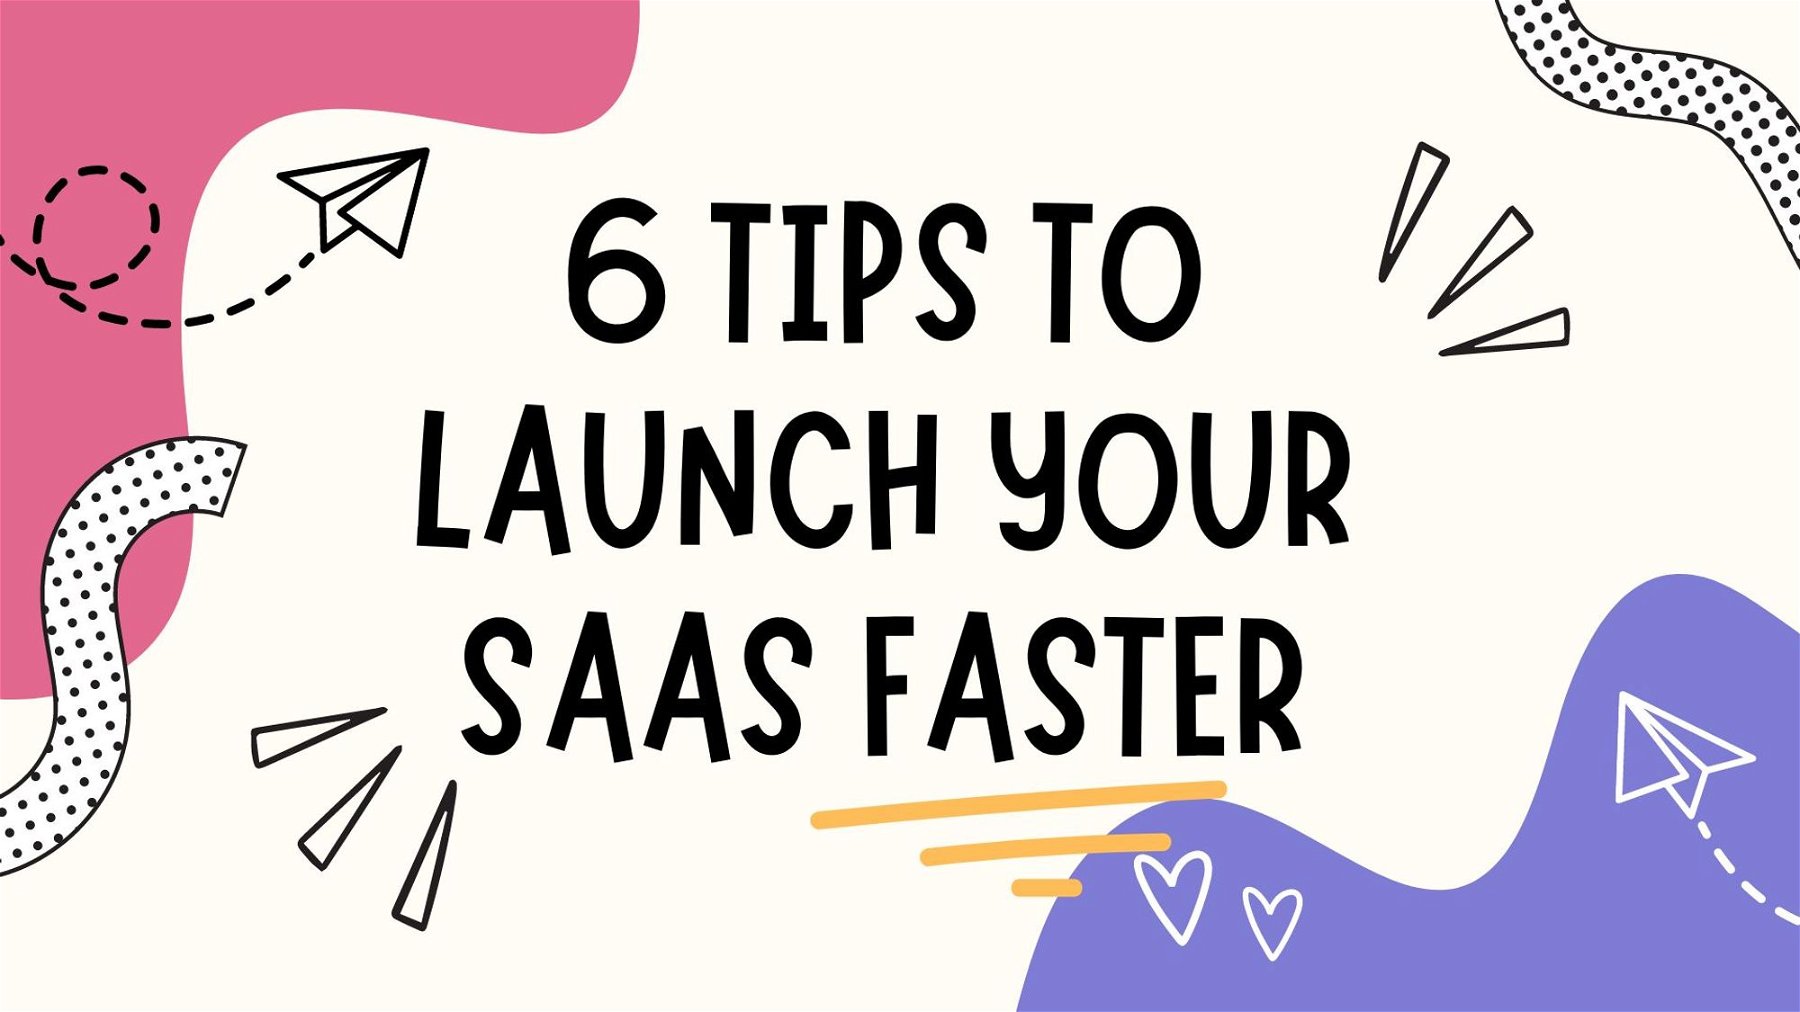 6 Tips to launch your SaaS faster